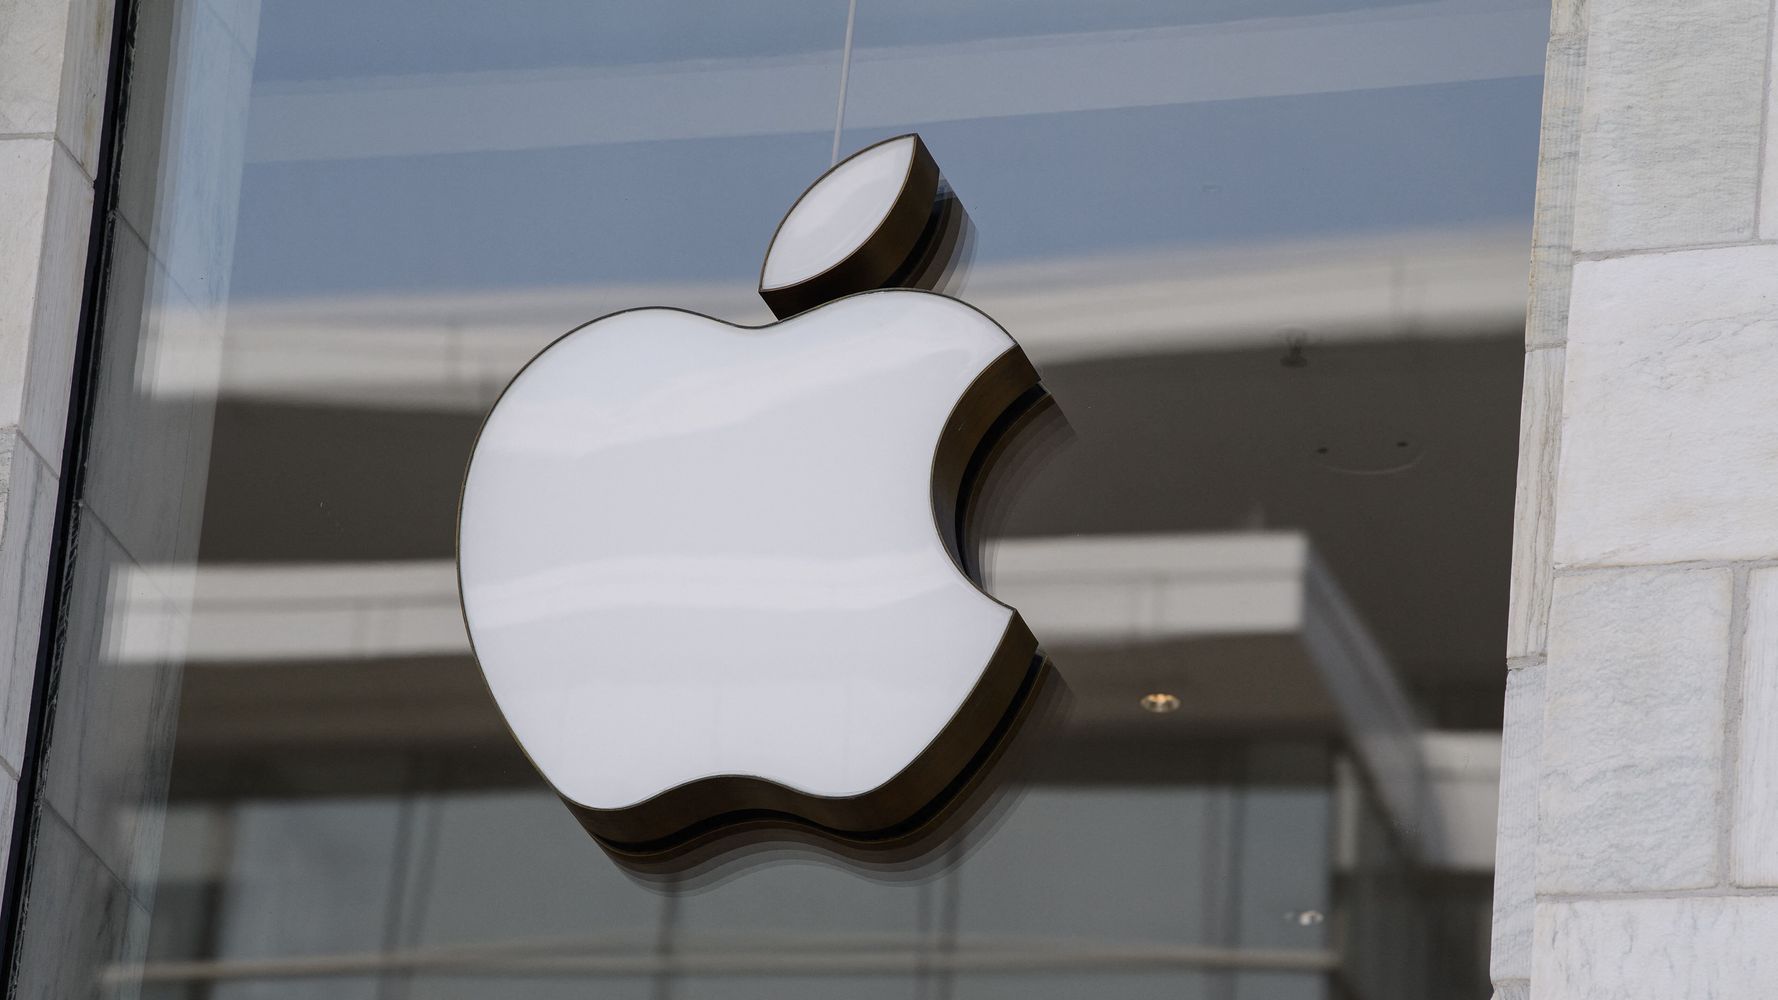 Apple Workers Walk Out On Christmas Eve, Demanding Better Working Conditions